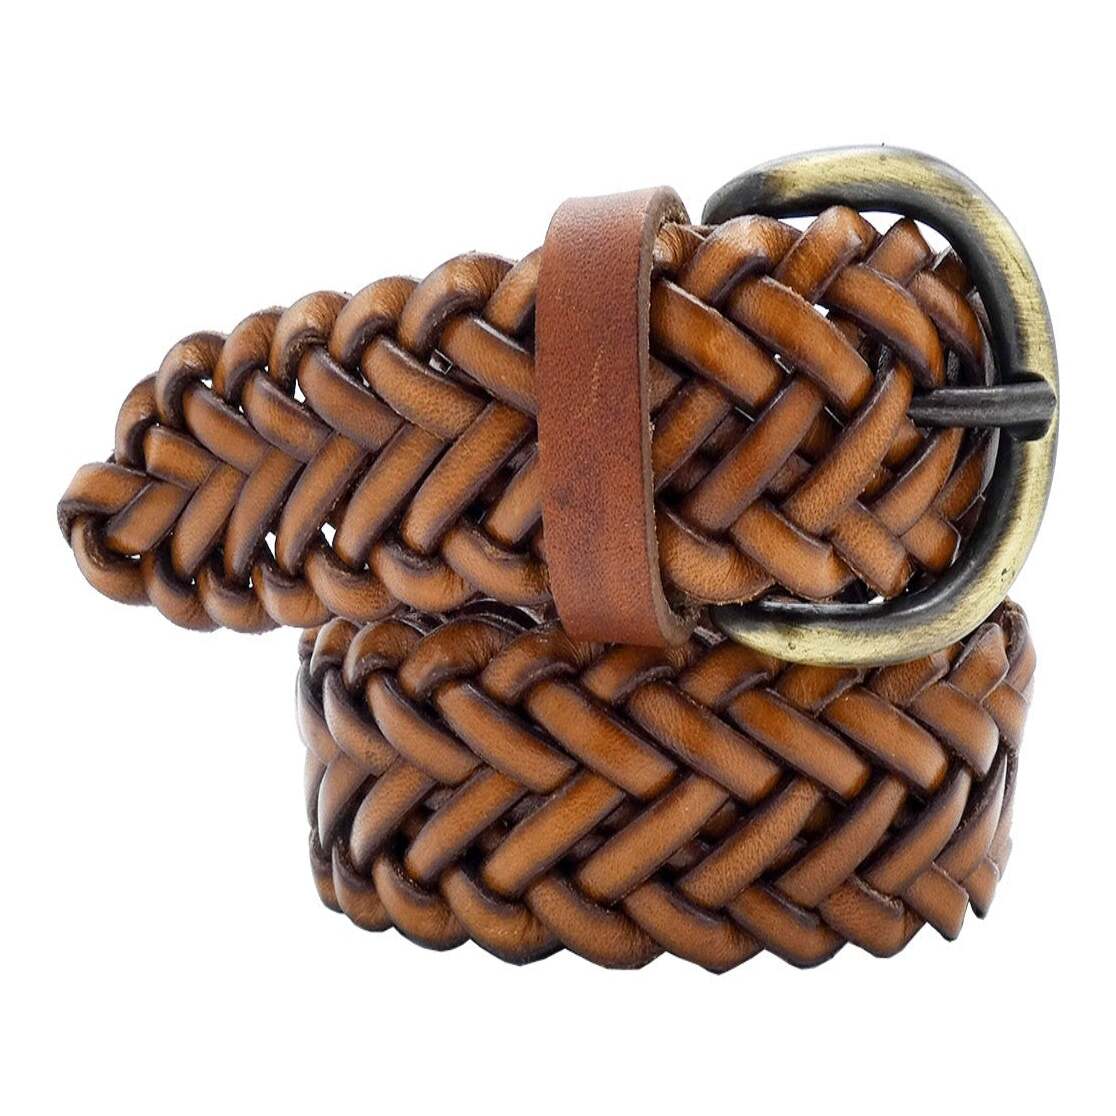 Hand-woven leather belt with handcrafted zamak buckle - Giglio